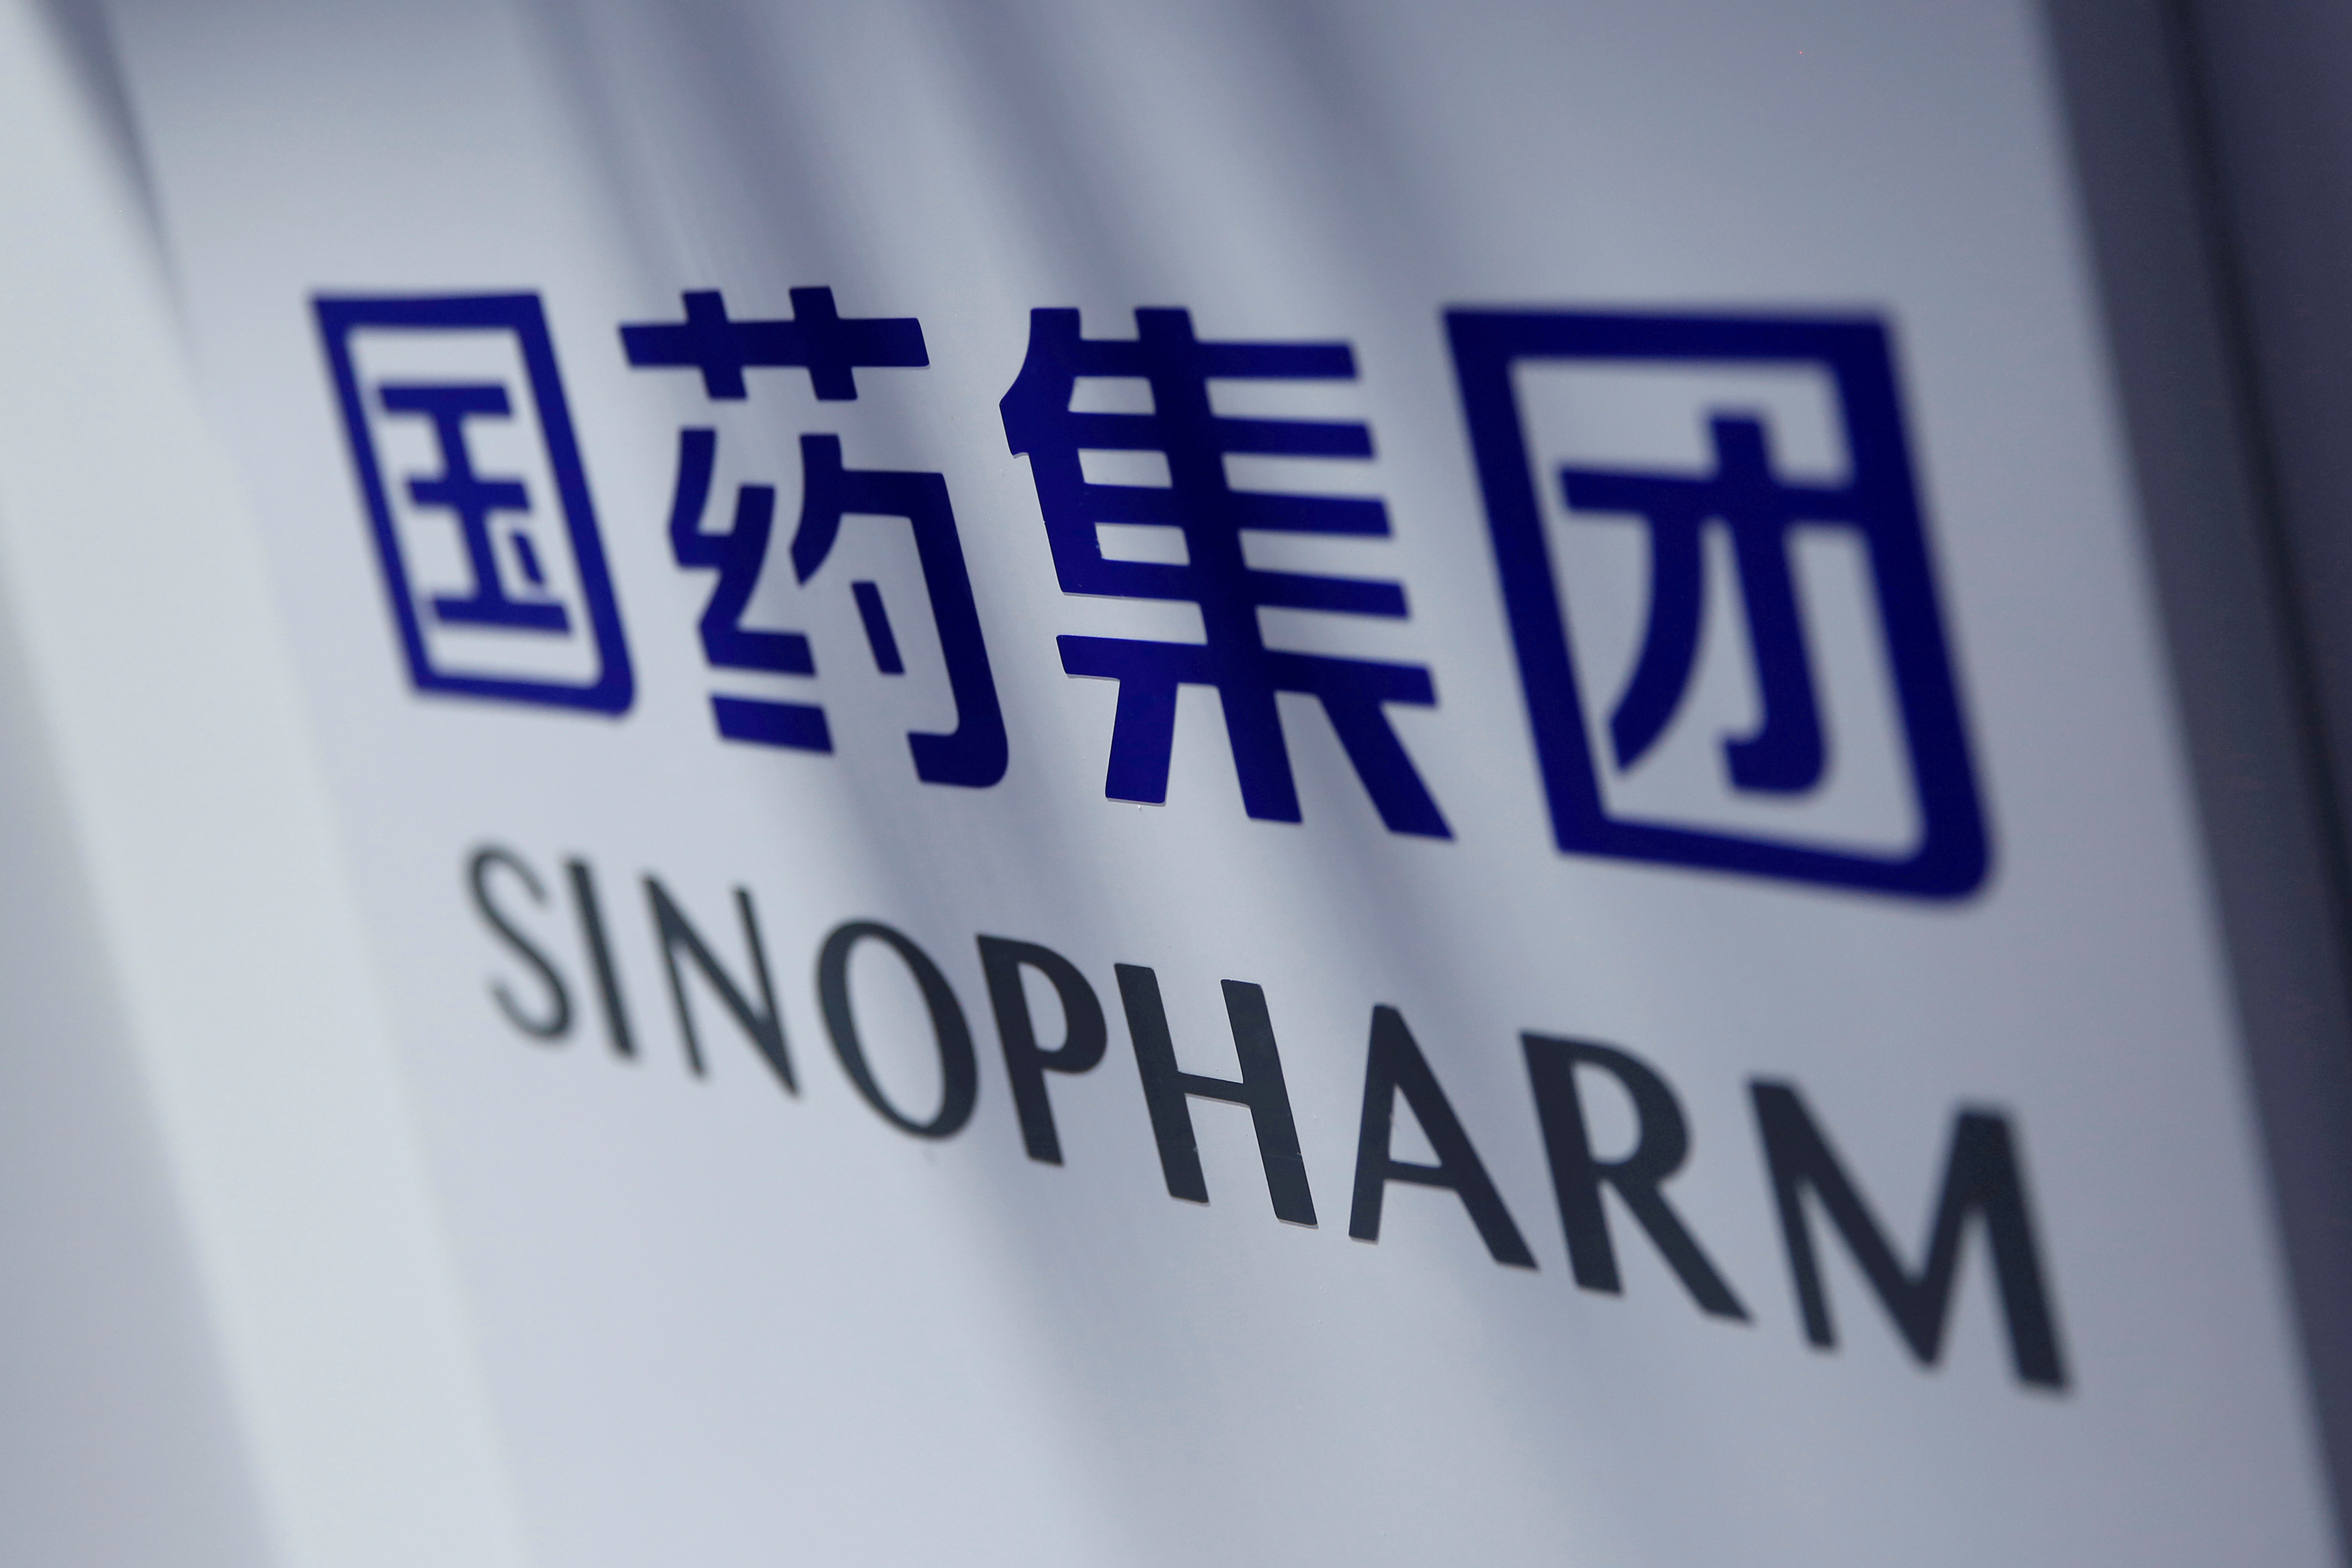 A Sinopharm sign is seen at the 2020 China International Fair for Trade in Services (CIFTIS) in Beijing, China, September 5, 2020. REUTERS/Tingshu Wang/File Photo